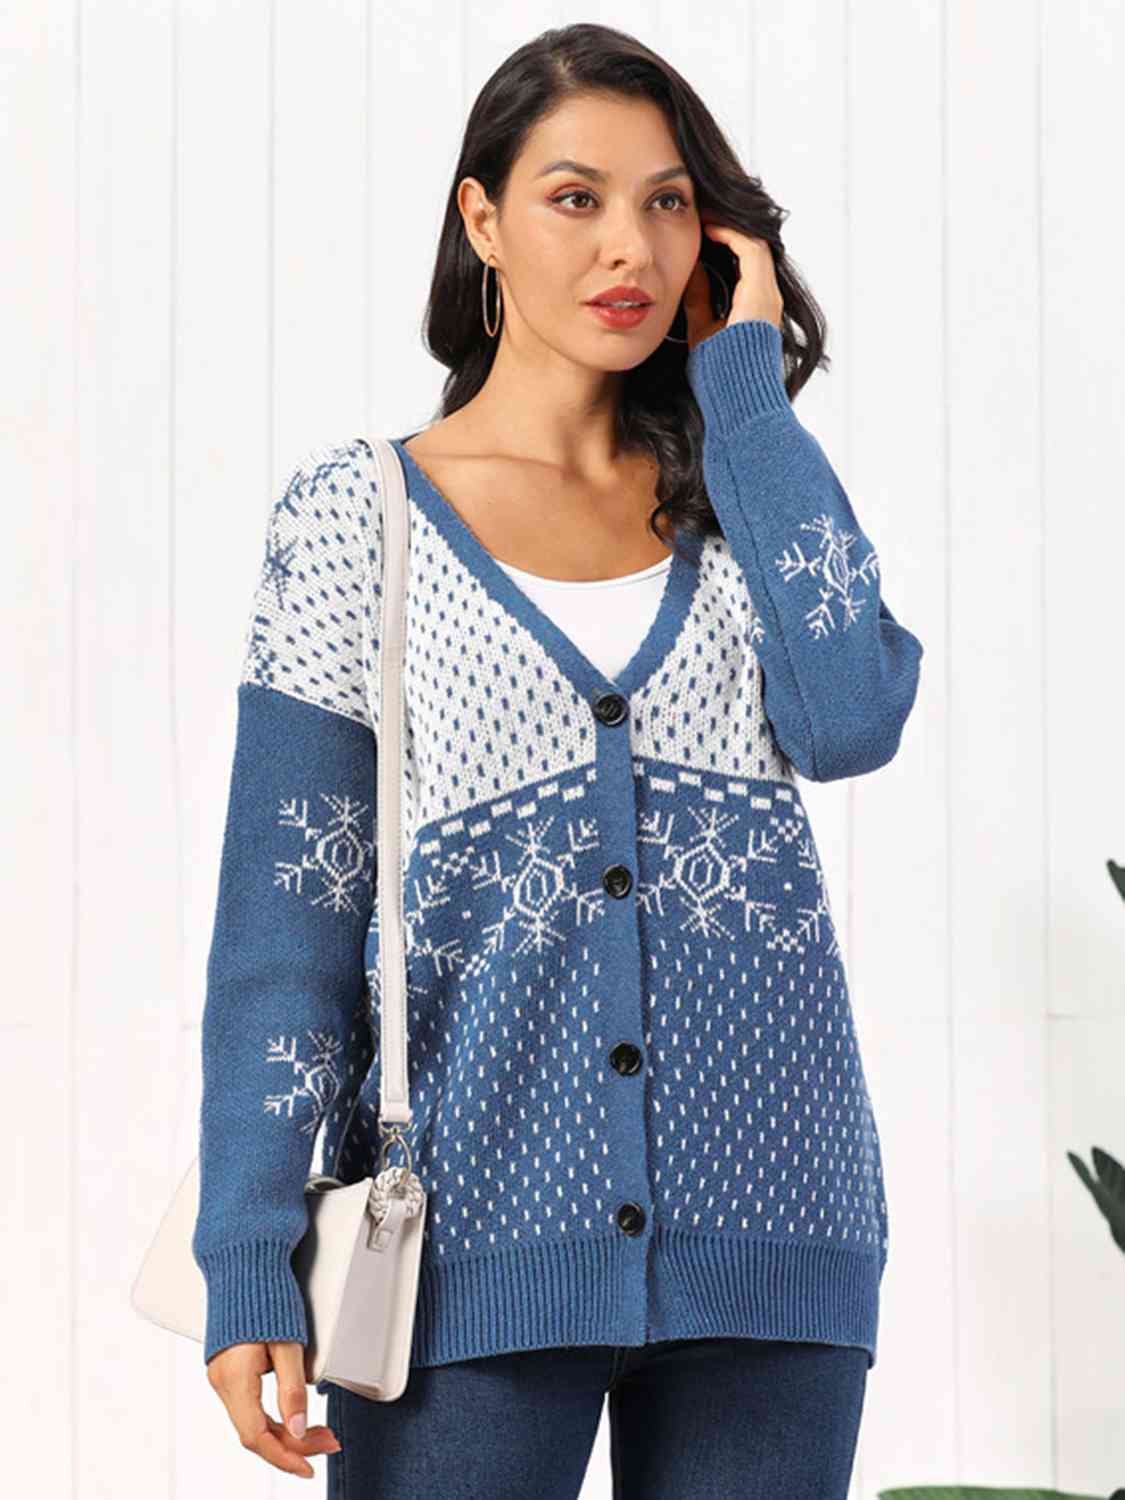 Snowflake Button Down Cardigan - Kawaii Stop - A@Y@M, Acrylic Cardigan, Casual Elegance, Chic Layering, Christmas, Cold Weather Wardrobe, Comfy Winter Clothes, Cozy Style, Fashion Forward, Fashionable Outerwear, Ladies' Winter Apparel, Seasonal Must-Have, Ship From Overseas, Snowflake Cardigan, Snowflake Design, Snowflake Pattern, Stylish Button Down Cardigan, Trendy Knit Cardigan, Versatile Knitwear, Warm and Stylish, Winter Fashion, Women's Clothing, Women's Sweaters